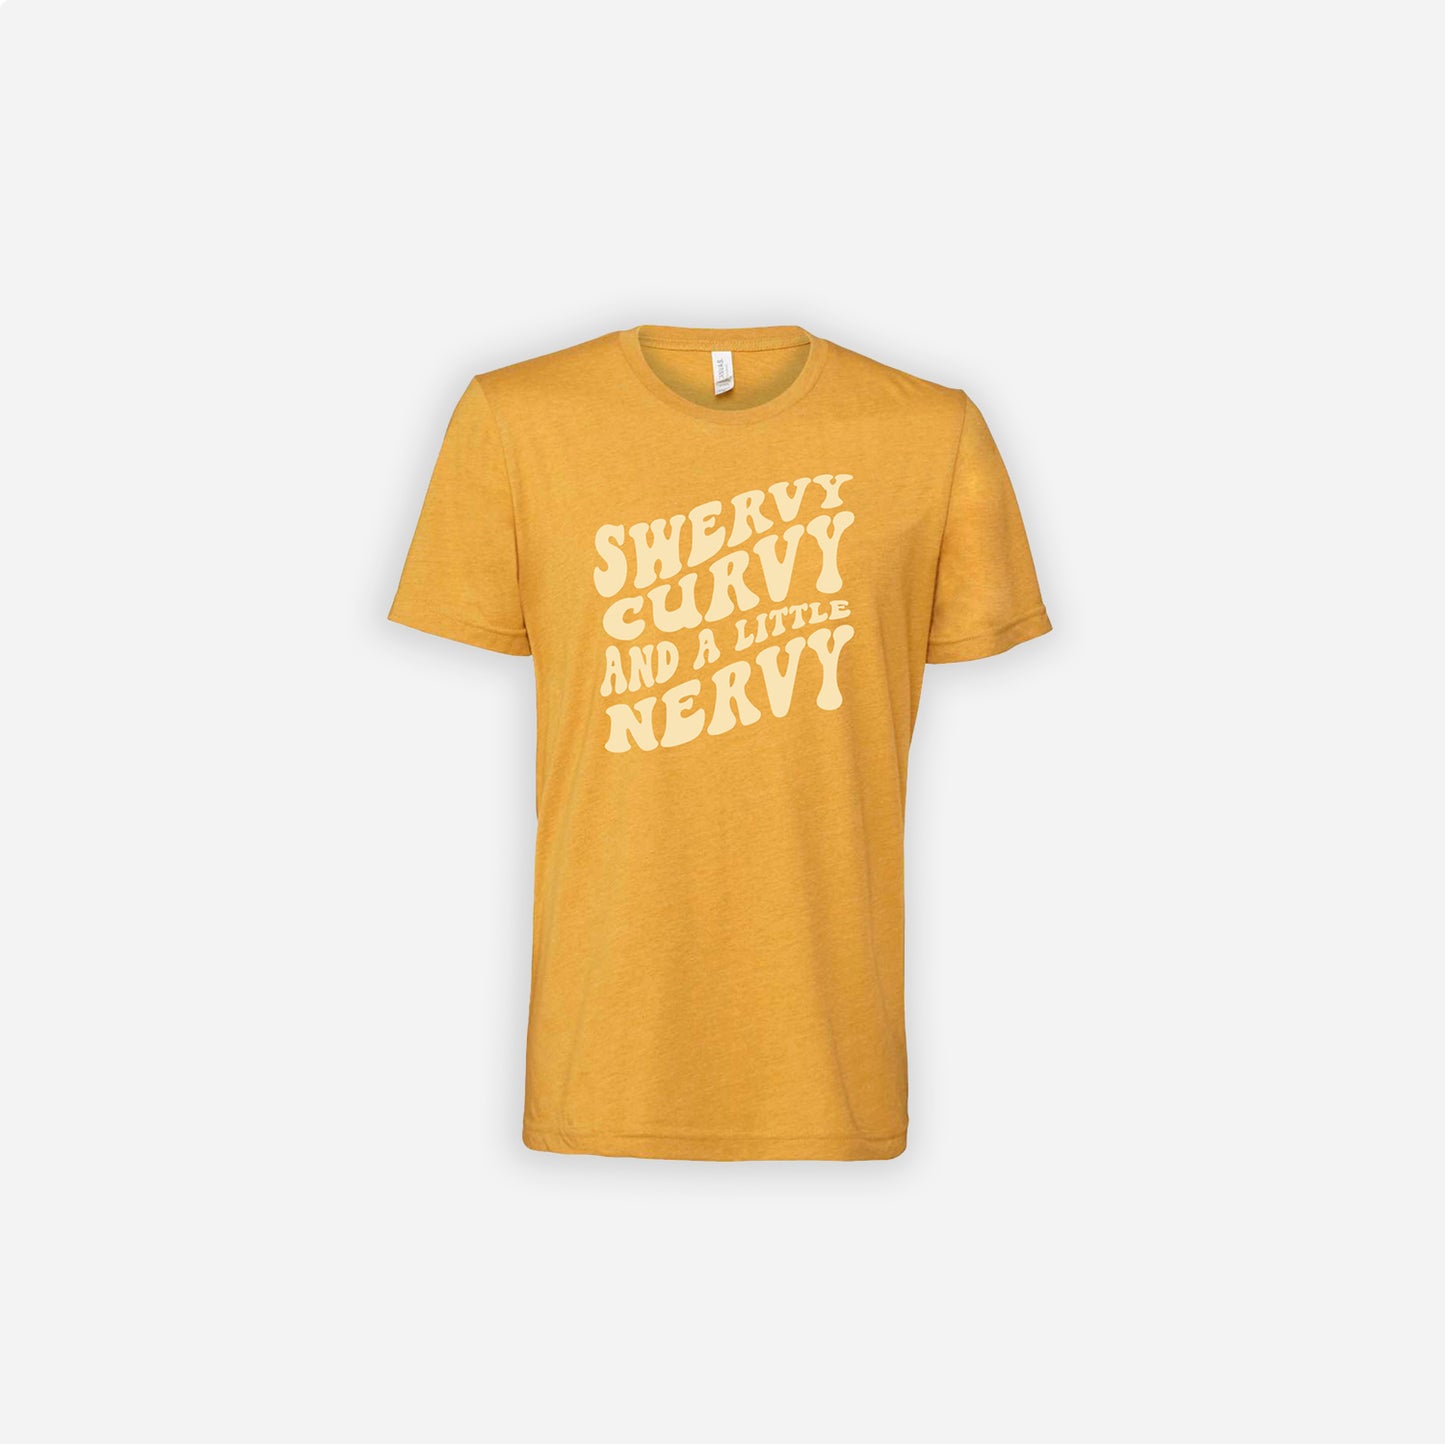 SWERVY CURVY AND A LITTLE NERVY T-SHIRT